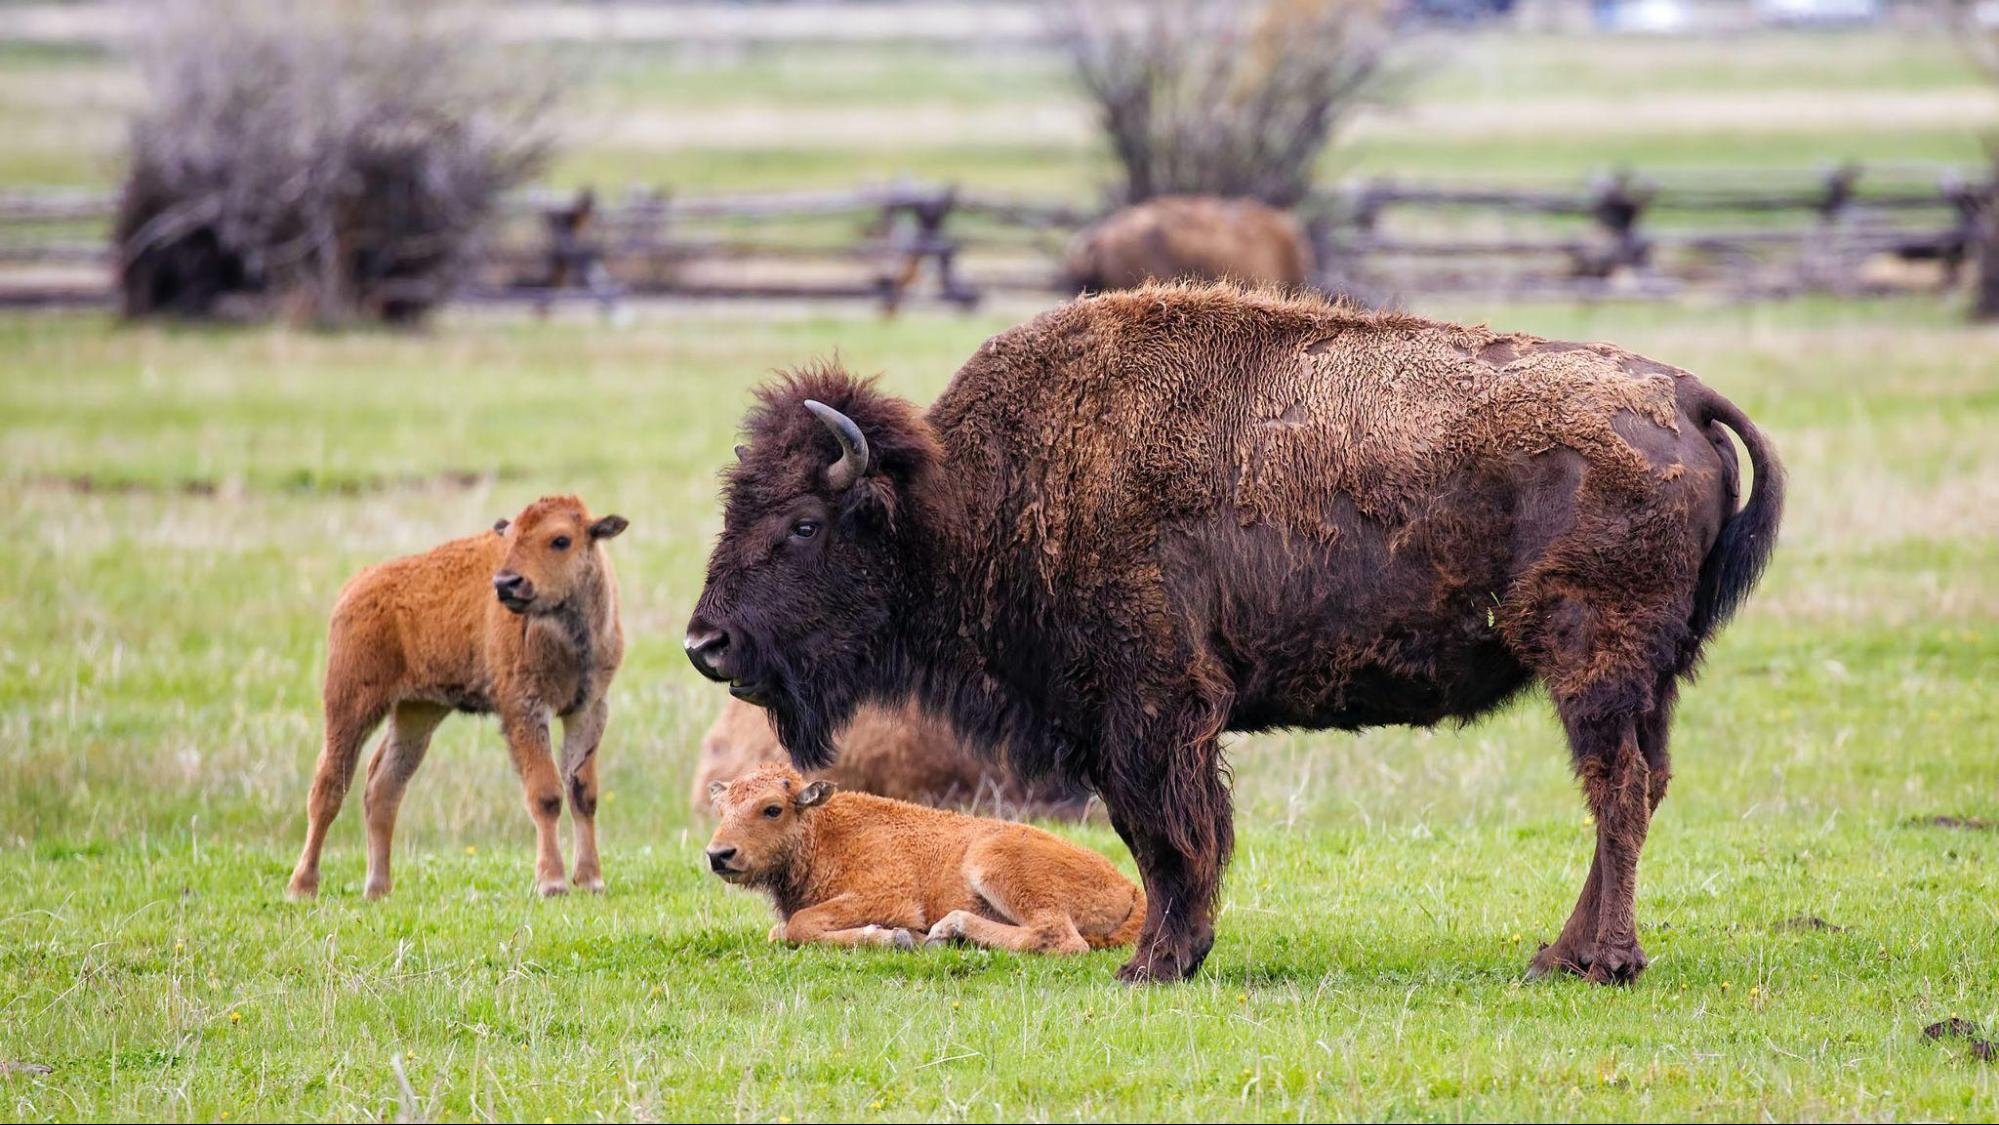 Bison and cows together